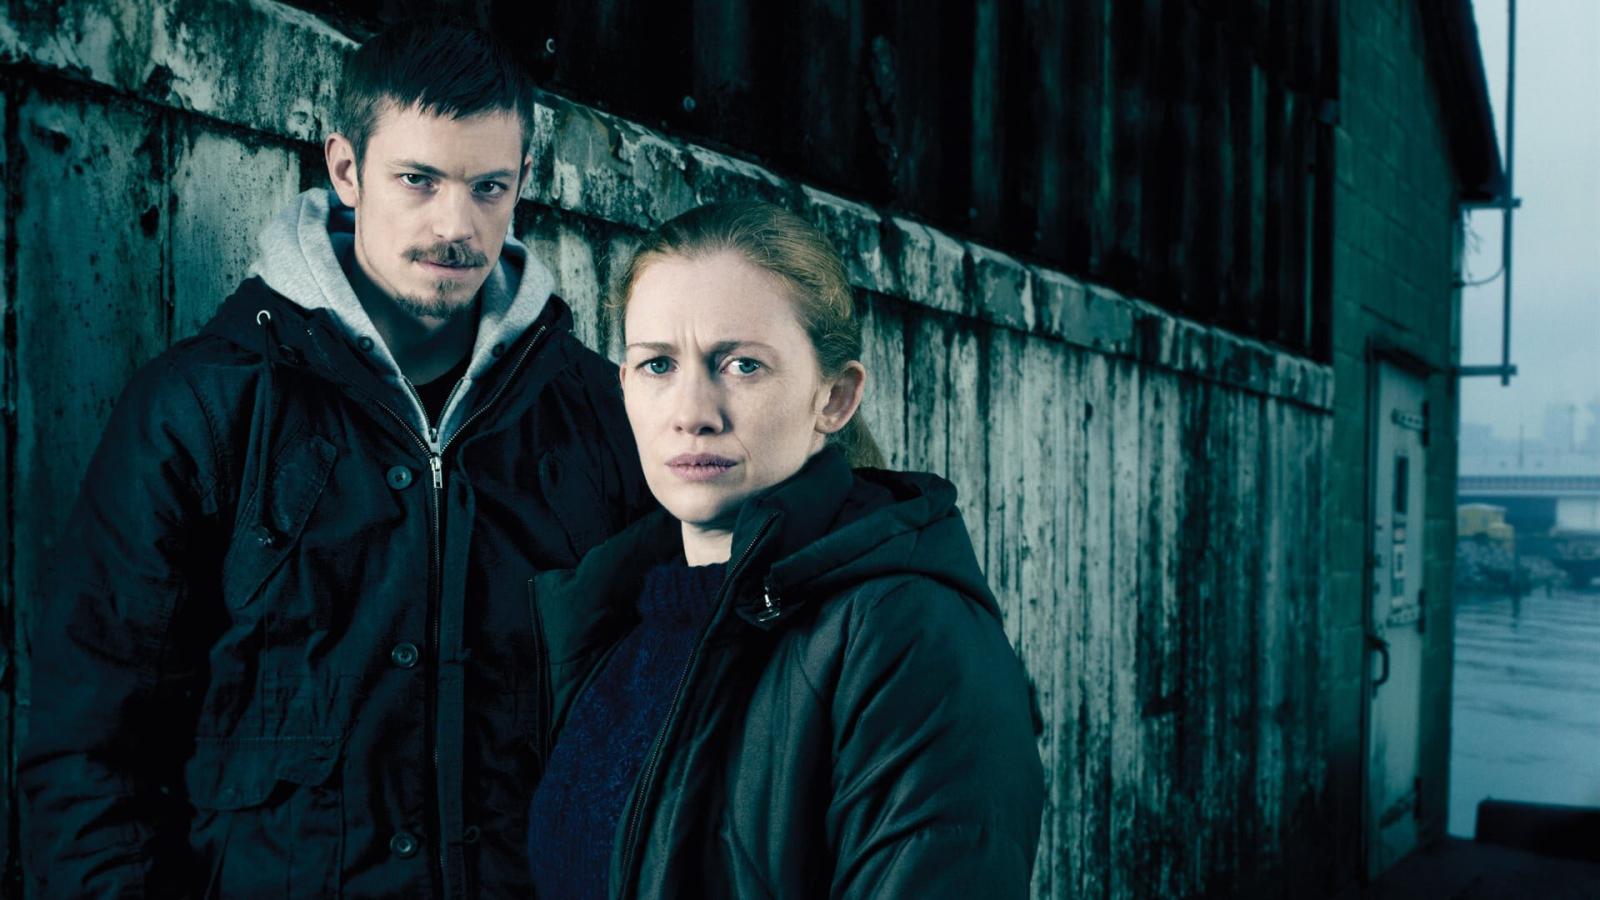 7 Crime Drama Series That Will Keep You On The Edge of Your Seat The Whole Time - image 1